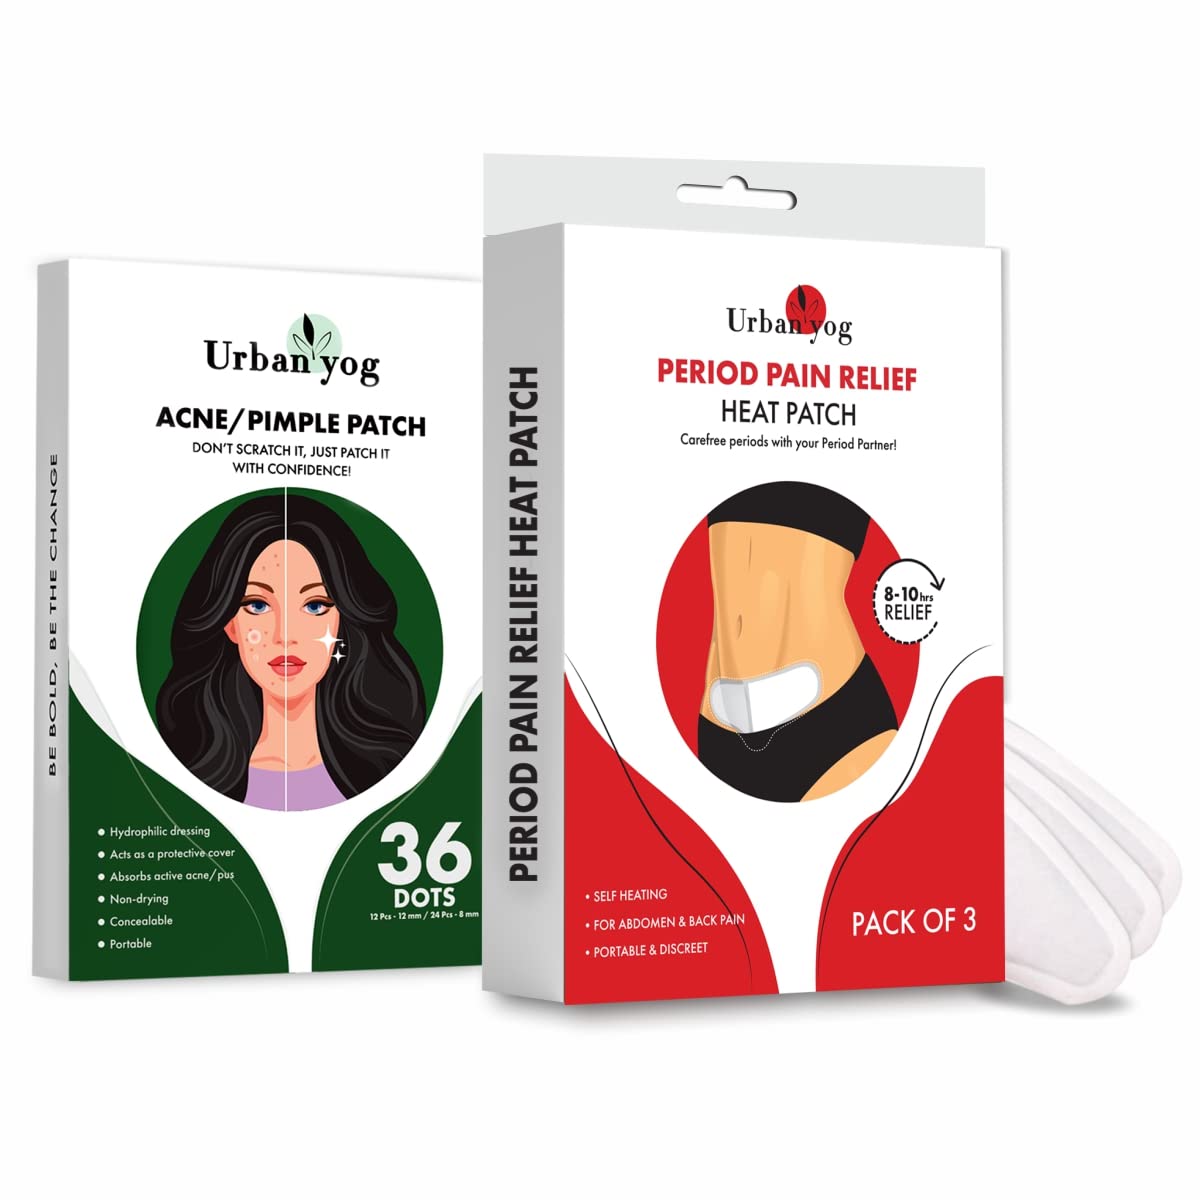 Urban Yog Period Care Kit - Acne/Pimple Patch (36 dots) and Heat Patch (Pack of 3)